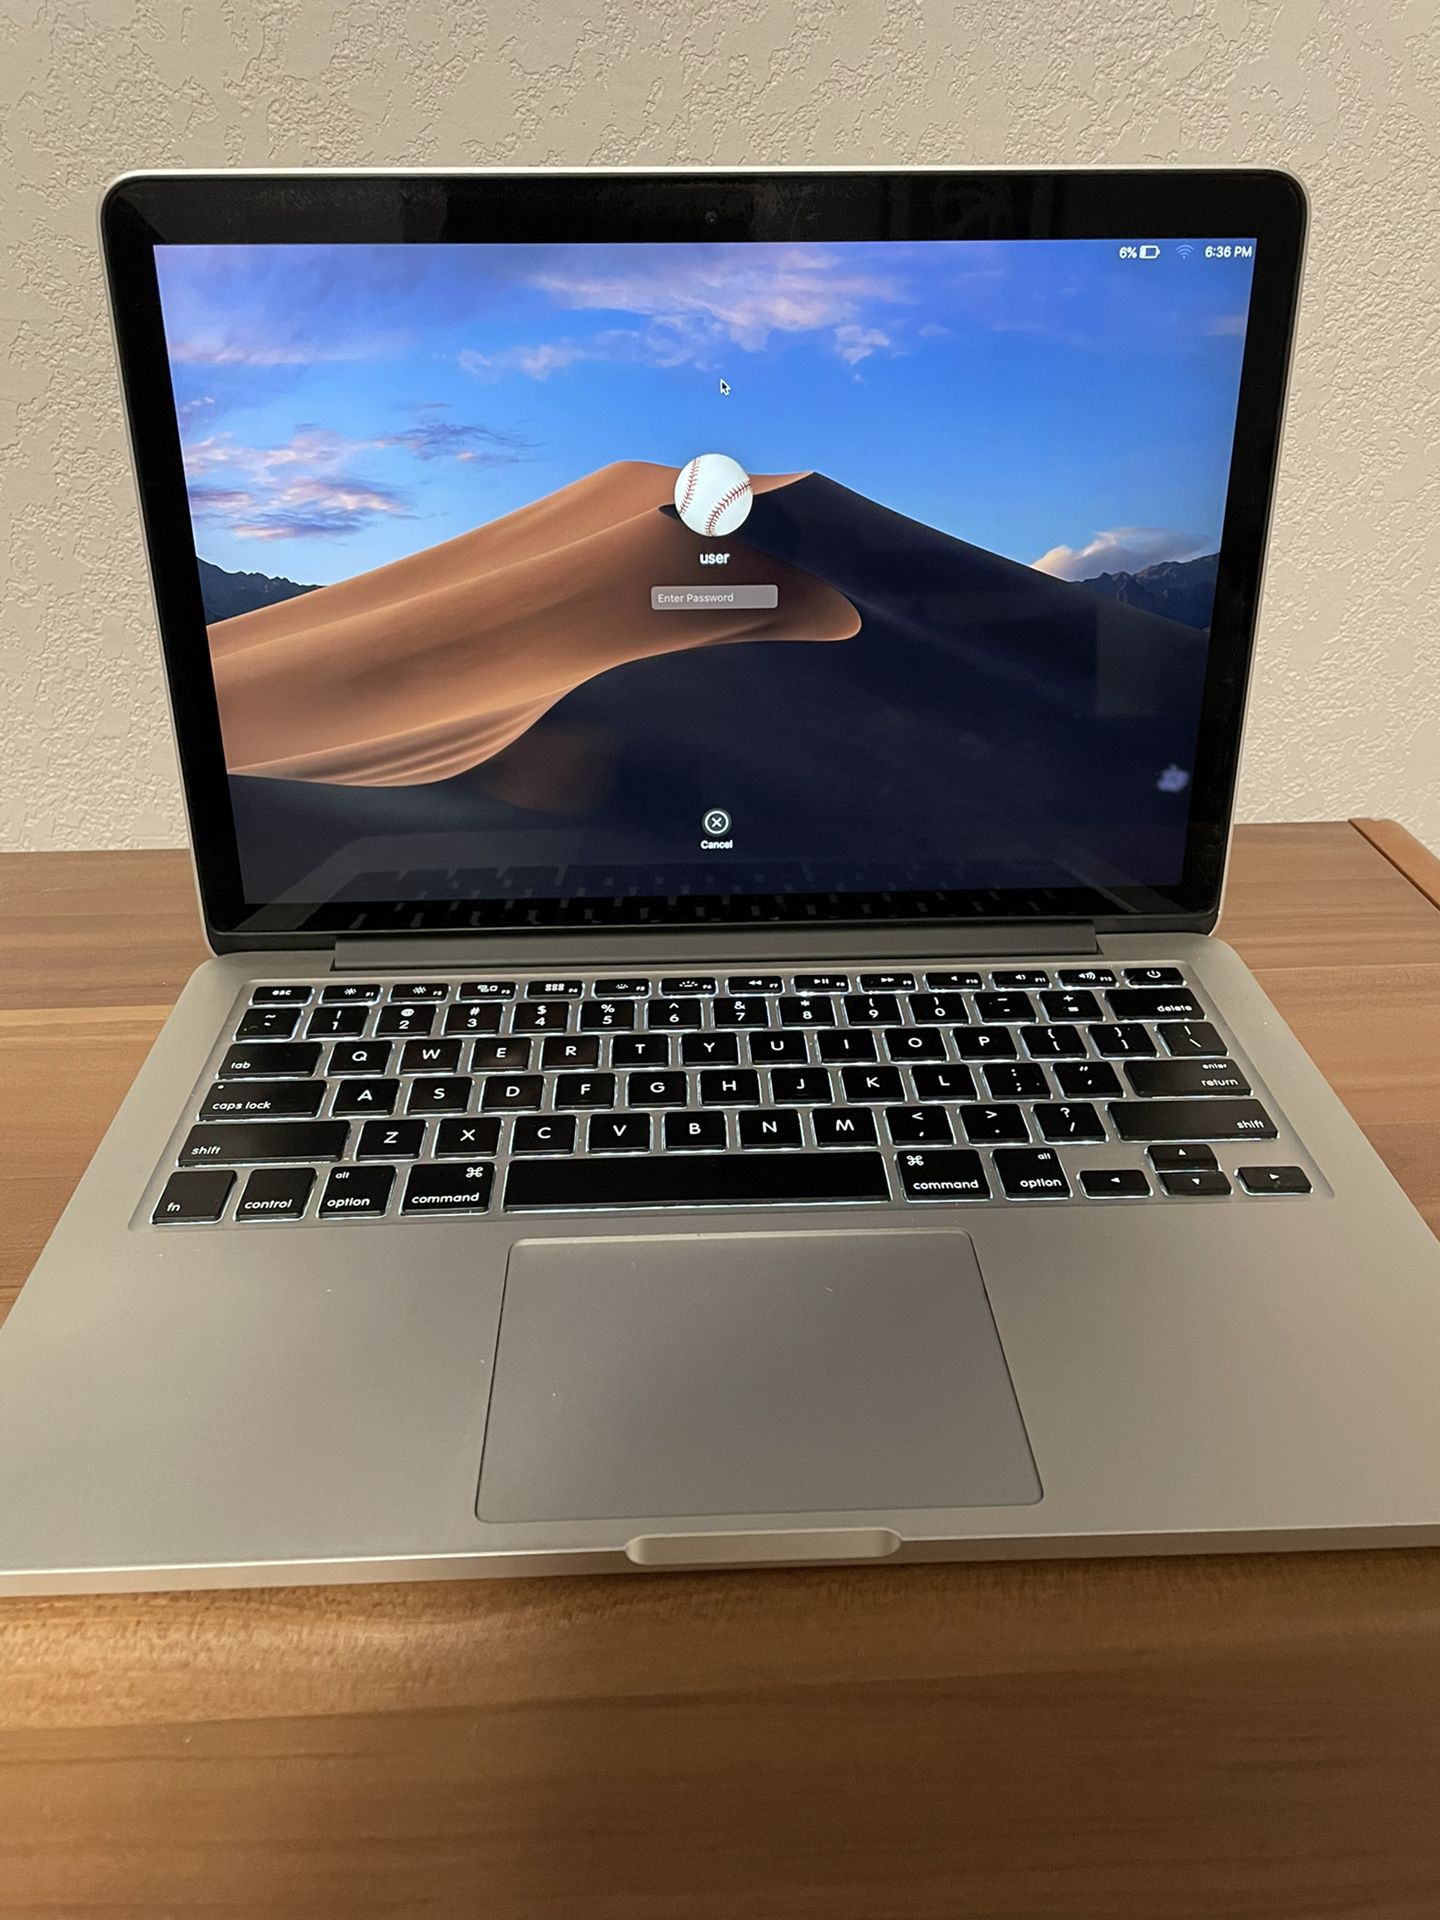 early 2015 macbook pro used